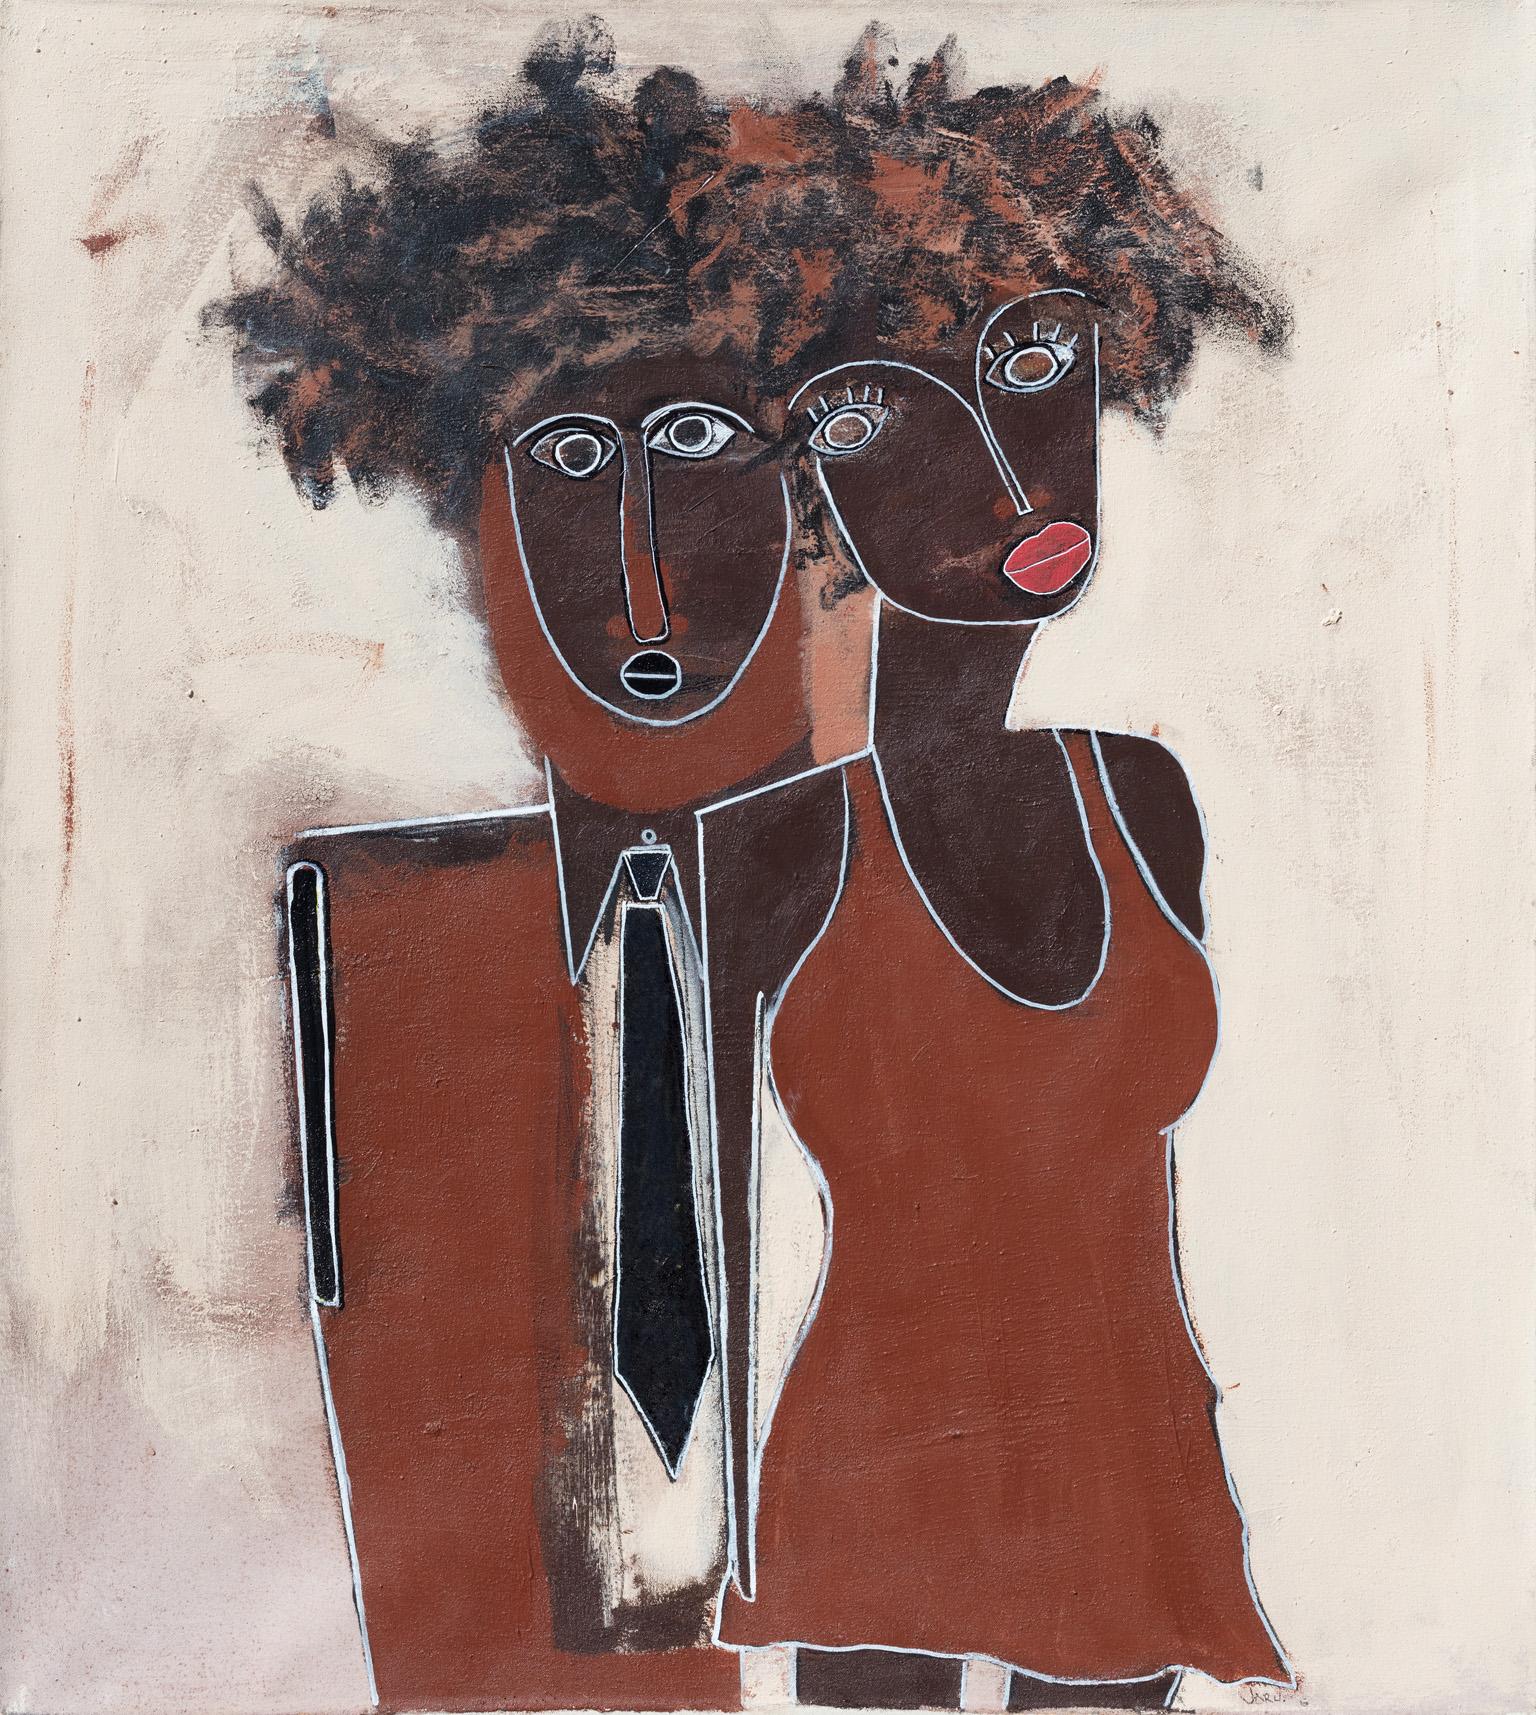 His and Her's - Expressionist Figurative Painting of an African American Couple